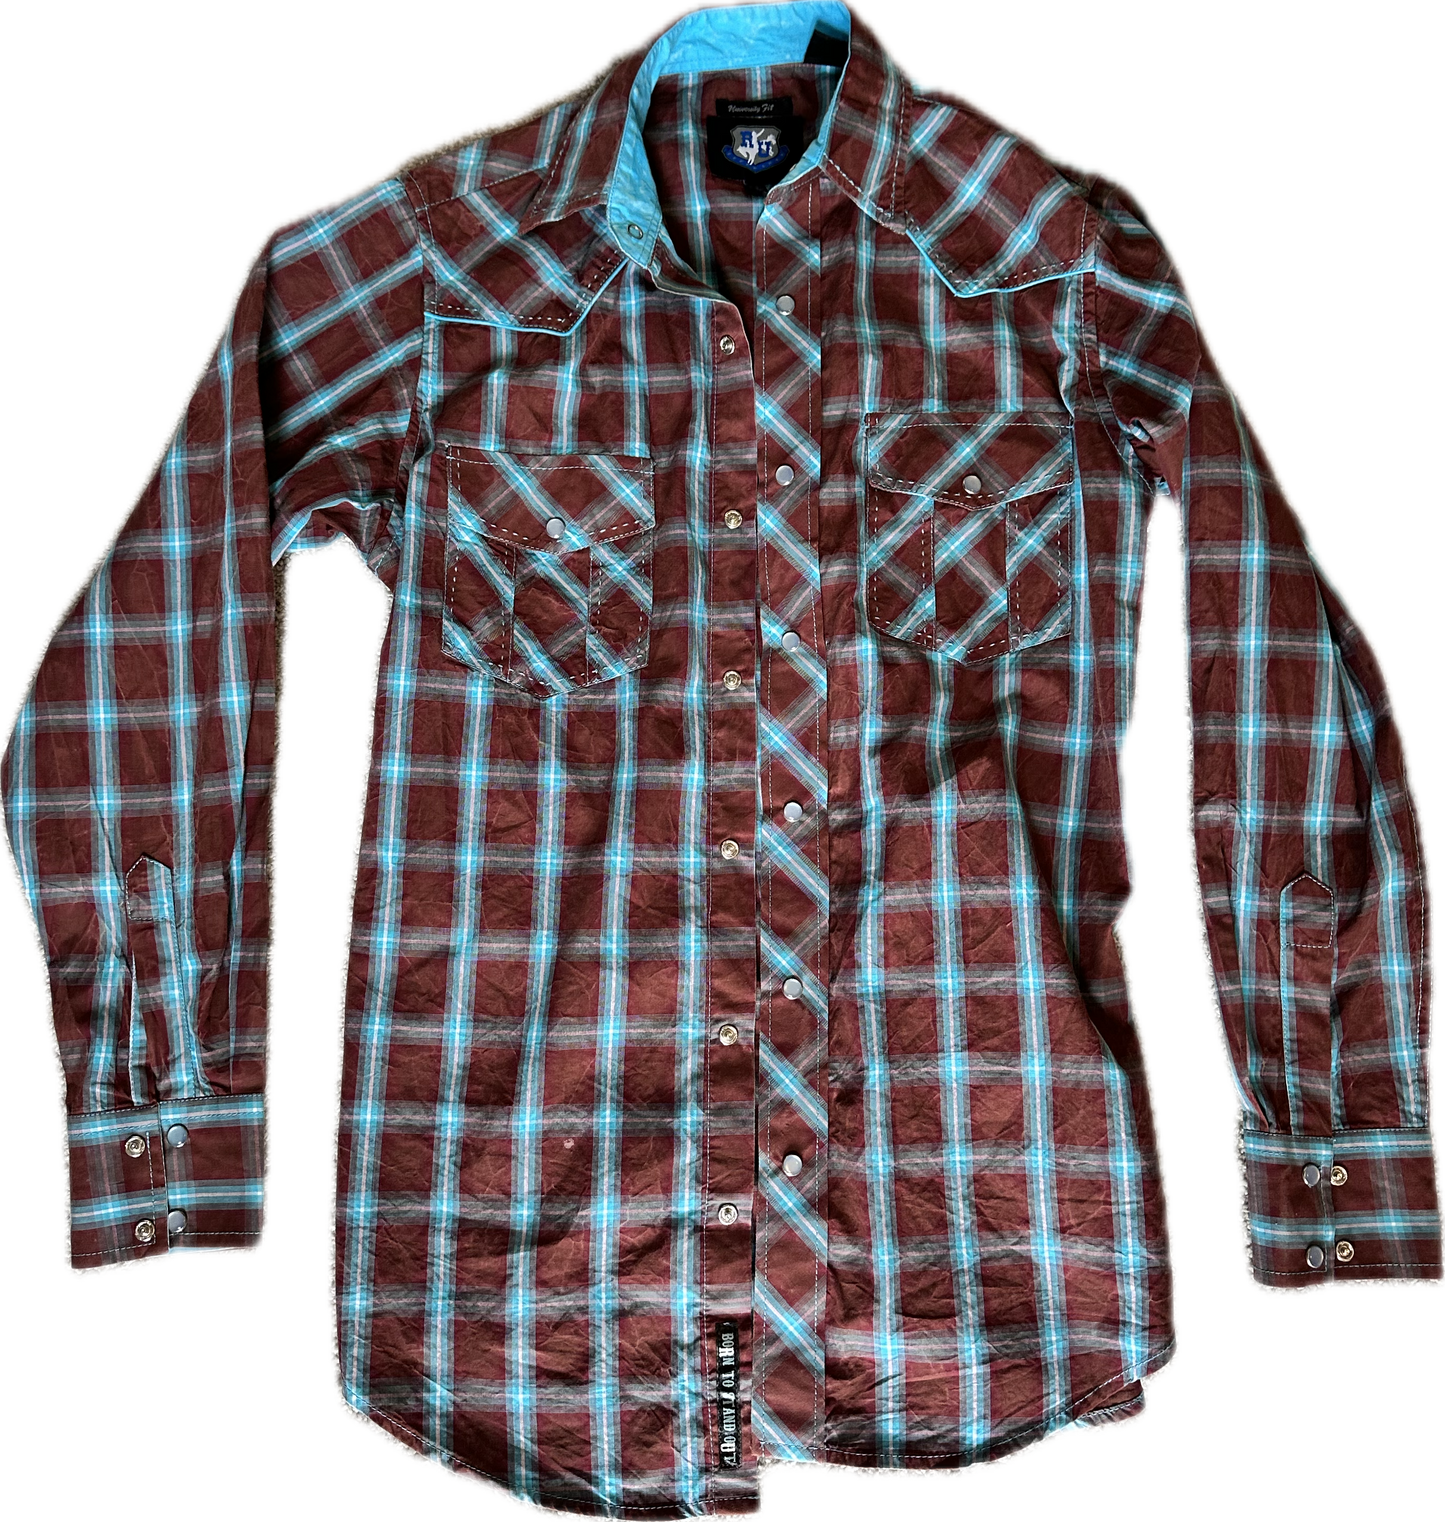 JUSTIFIED: Raylan's Western Wear Plaid Snap Button Up Shirt (M)